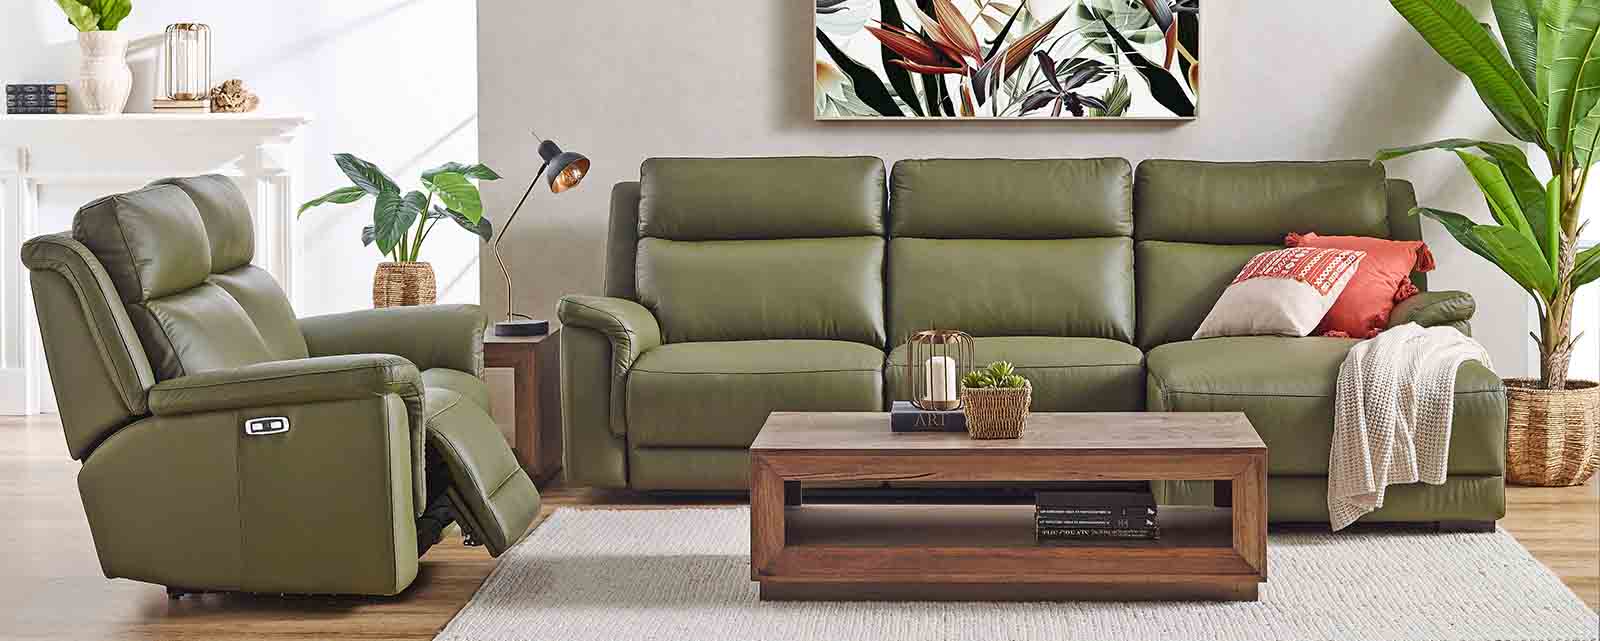 Sofas & Chairs for Ultimate Comfort at Home